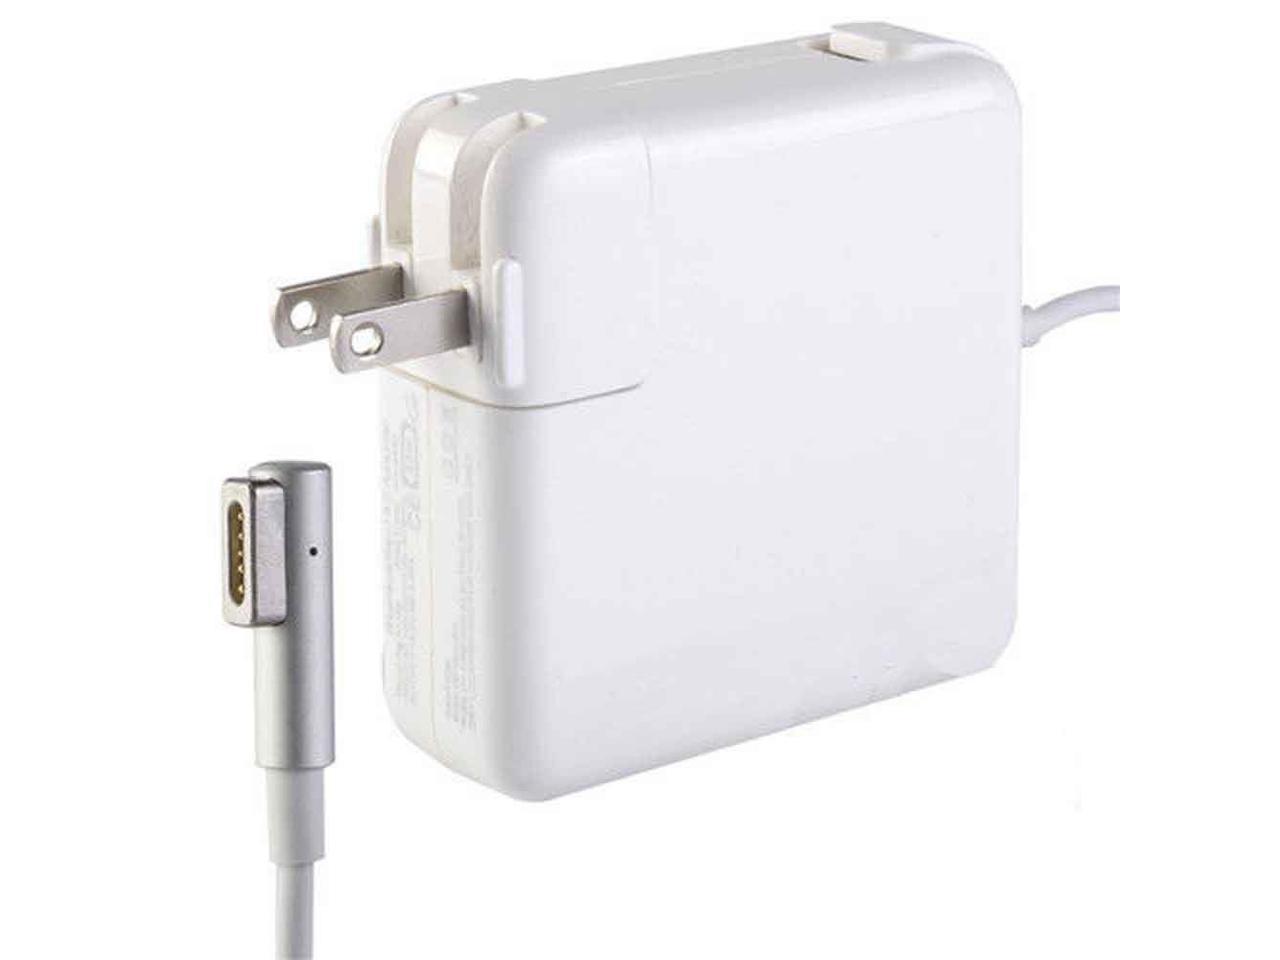 mid 2009 macbook pro charger